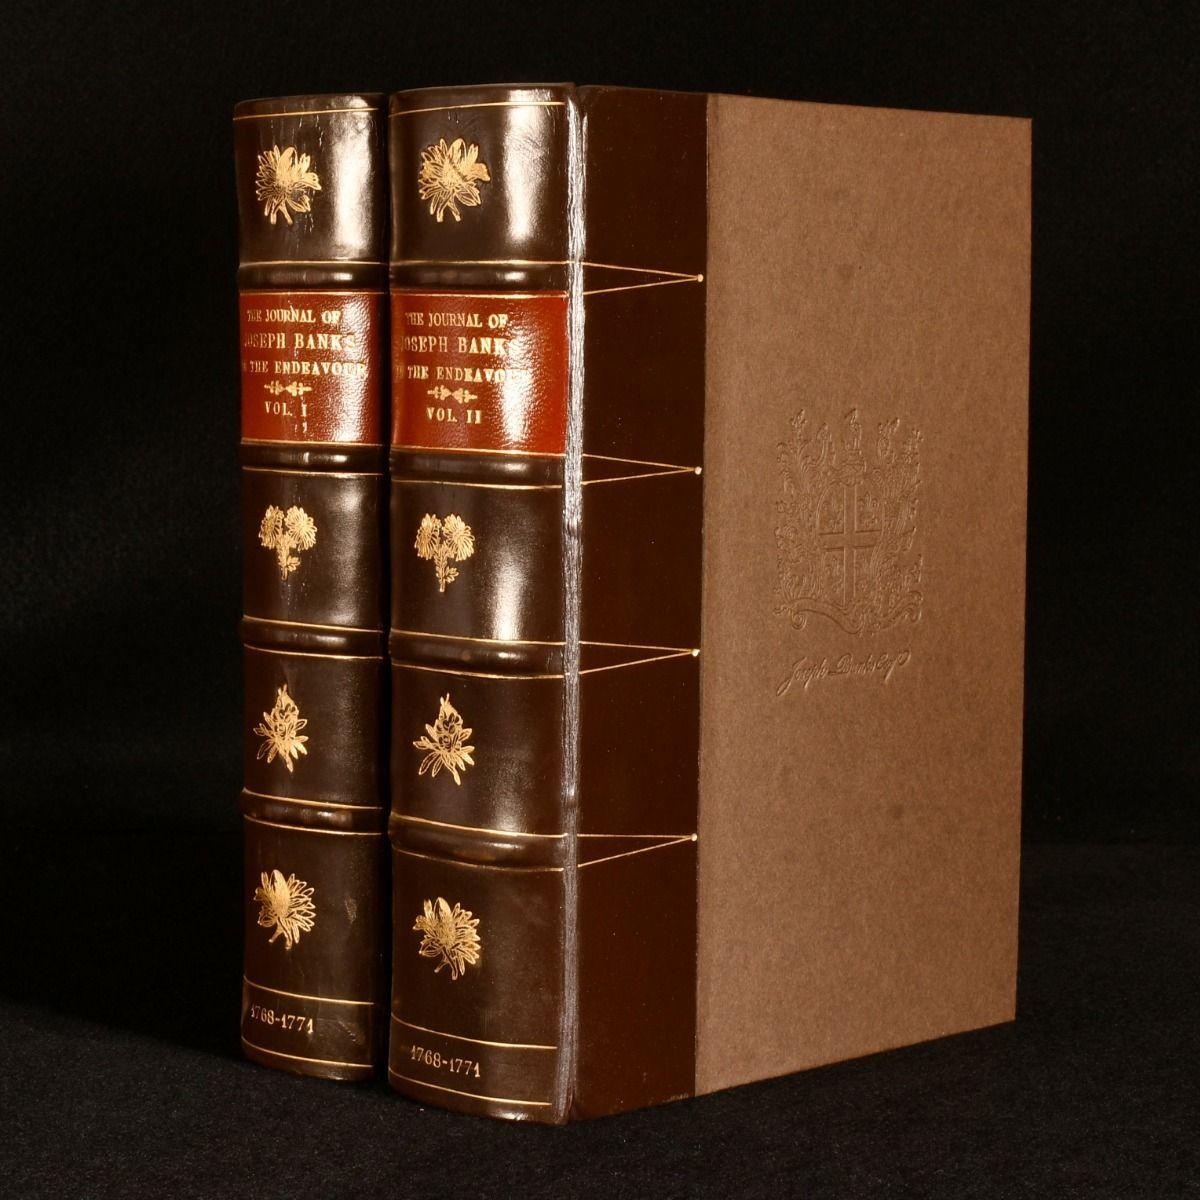 A striking limited edition facsimile of the travel journals of Joseph Banks, a smart work signed by Prince Philip, who wrote a preface for this edition.

A limited edition of five hundred copies, of which this is numbered forty-one.

Signed by